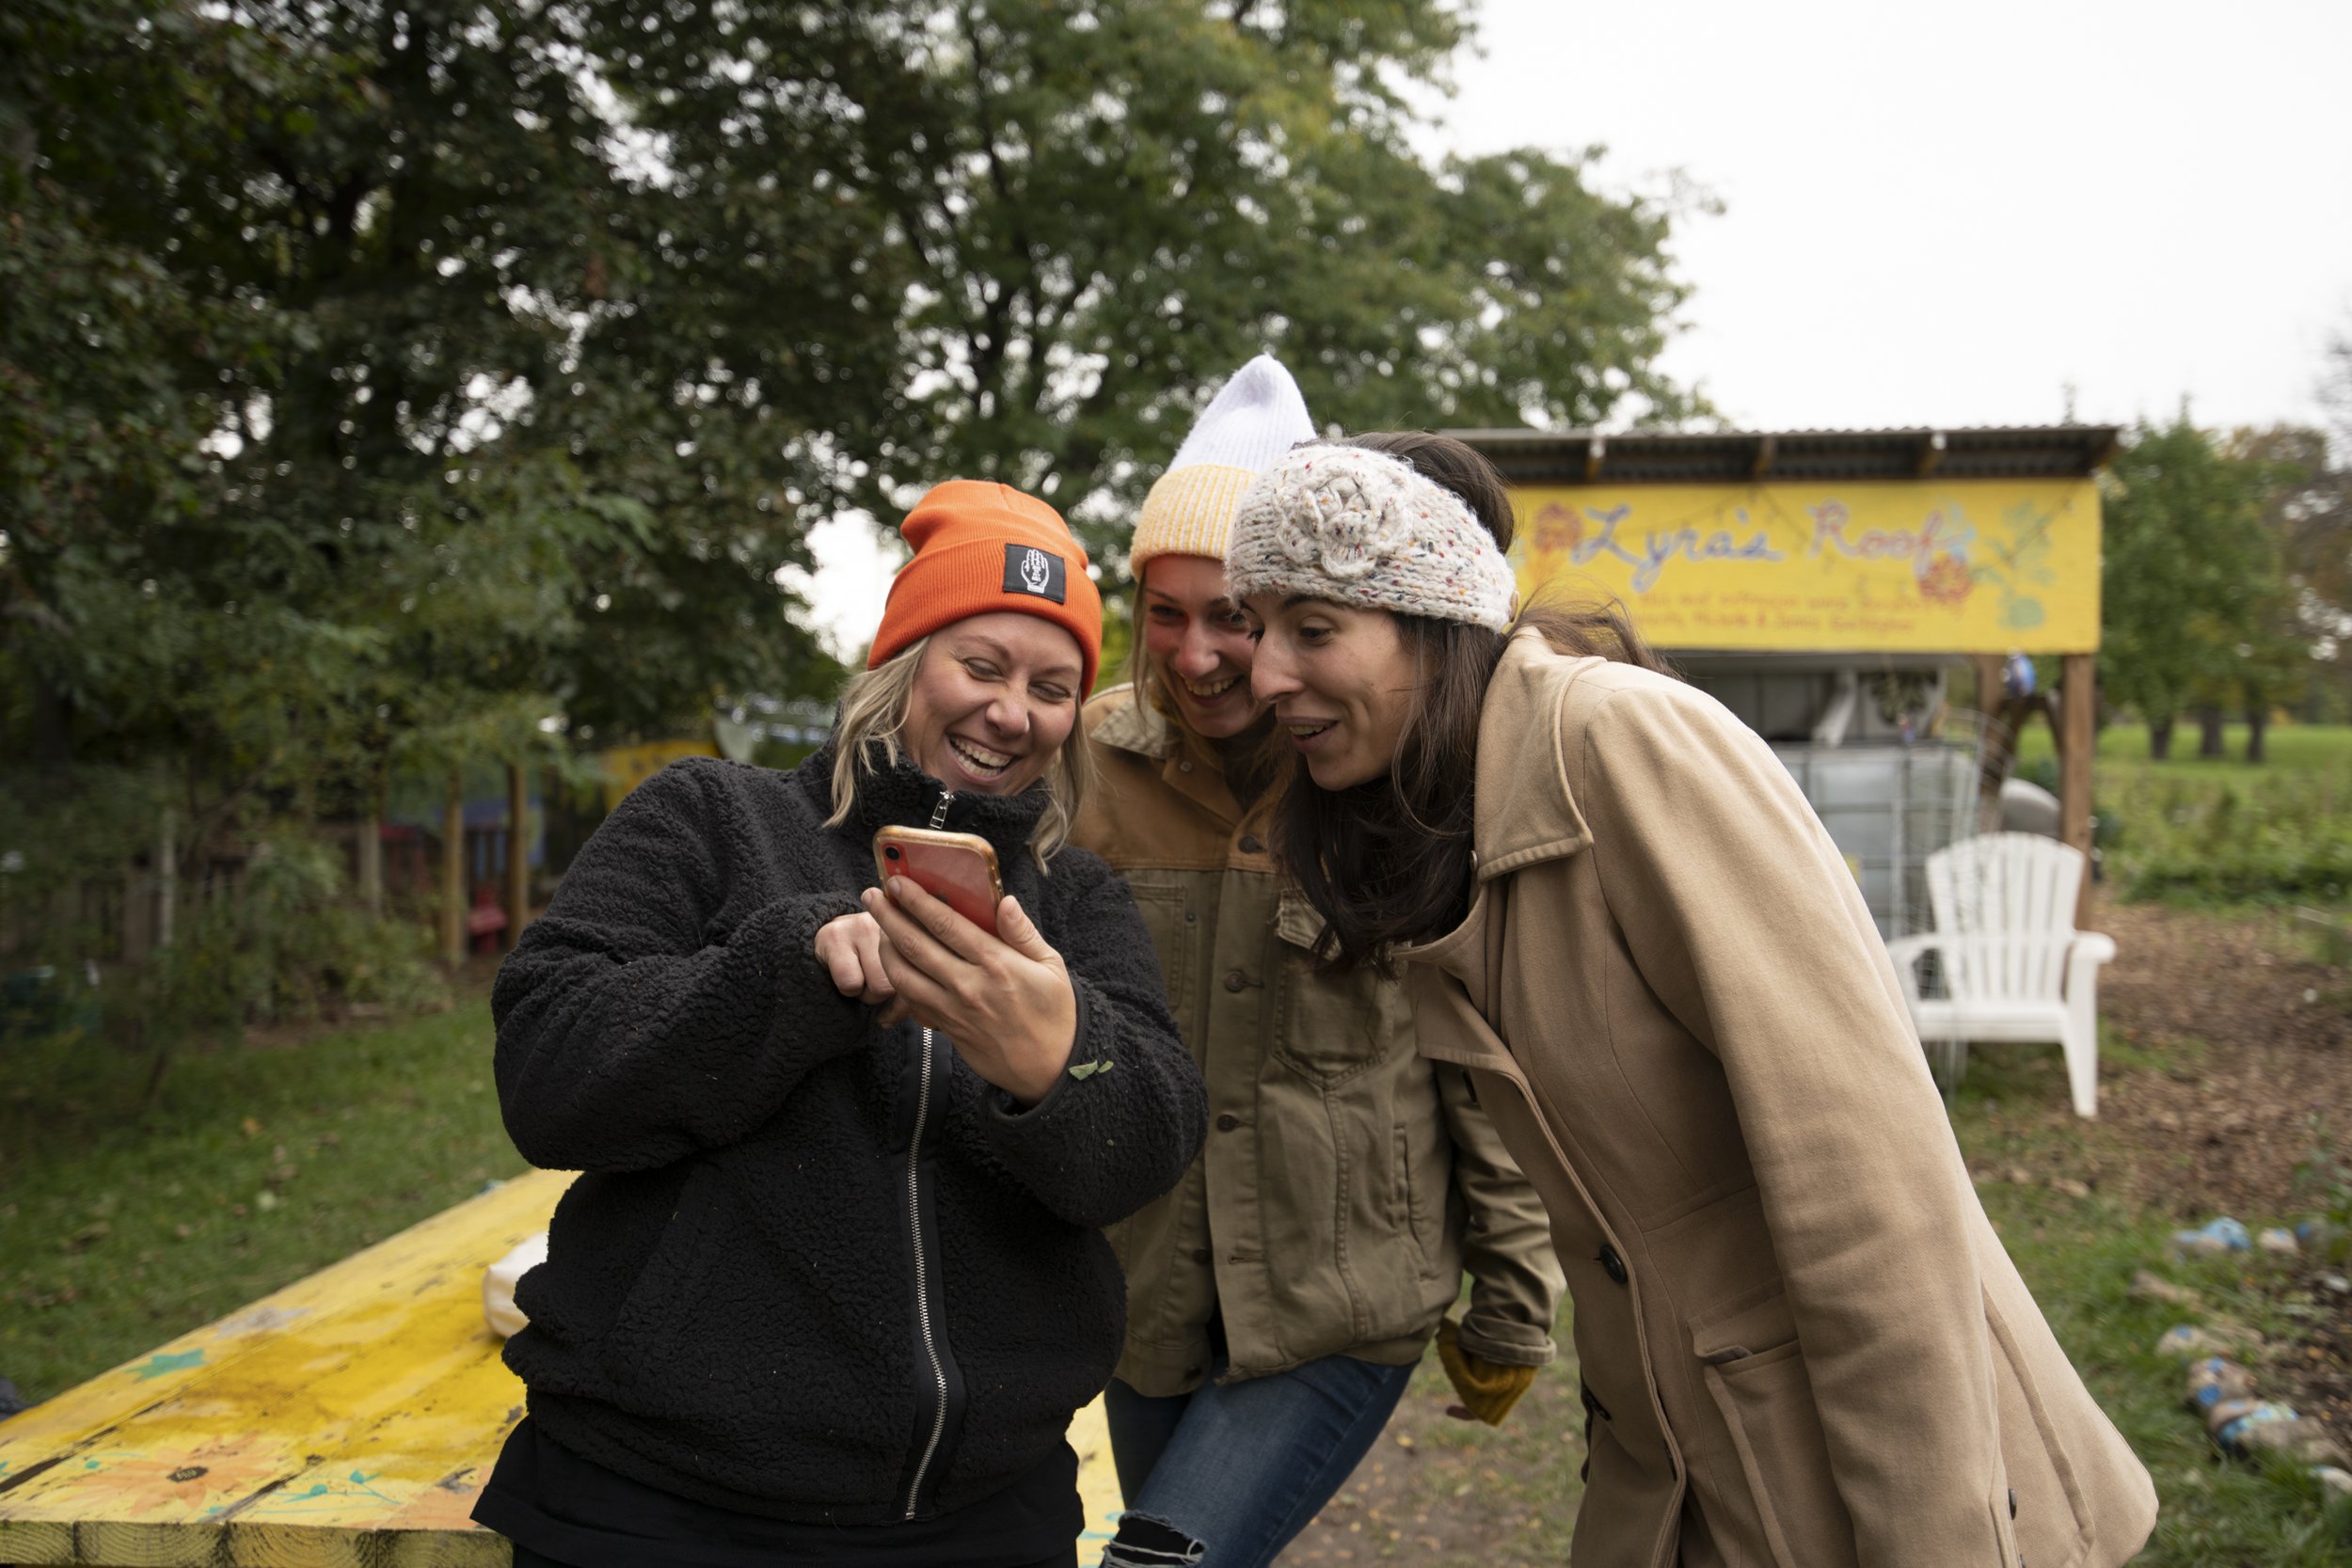  From left, Courtney Klee, Chloe Smith, and Gabi Kosoy share a laugh at a video on Klee’s phone at 490 Farmers in Rochester N.Y. on Oct. 23, 2021.  